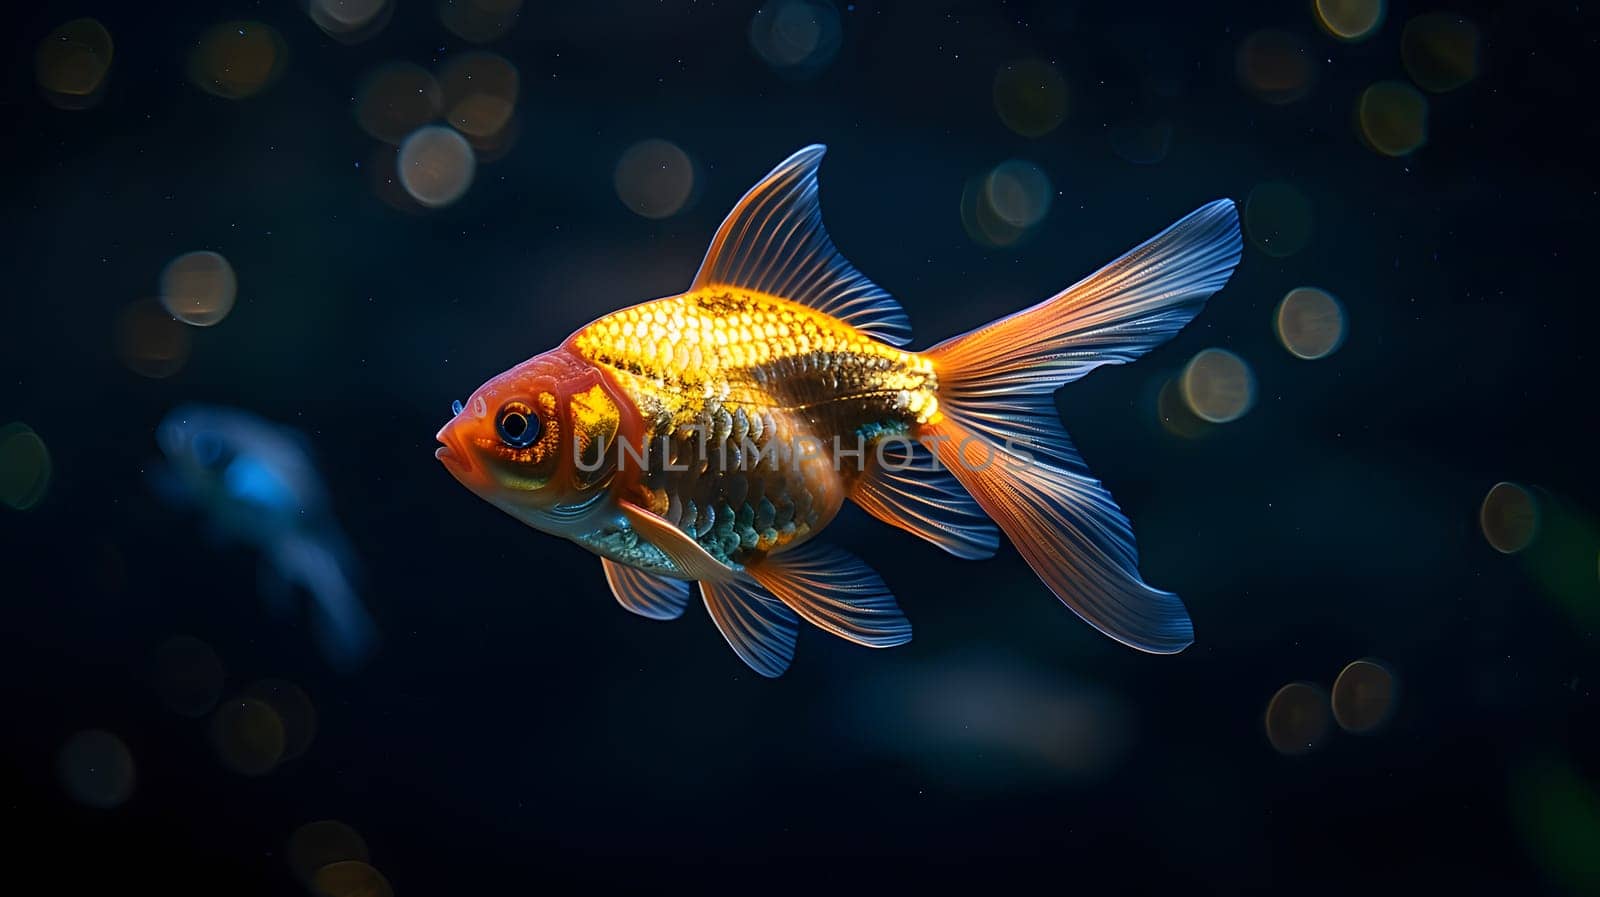 An electric blue goldfish with flowing tail fin swims gracefully in the dark, fluidfilled aquarium. A stunning example of rayfinned fish in marine biology